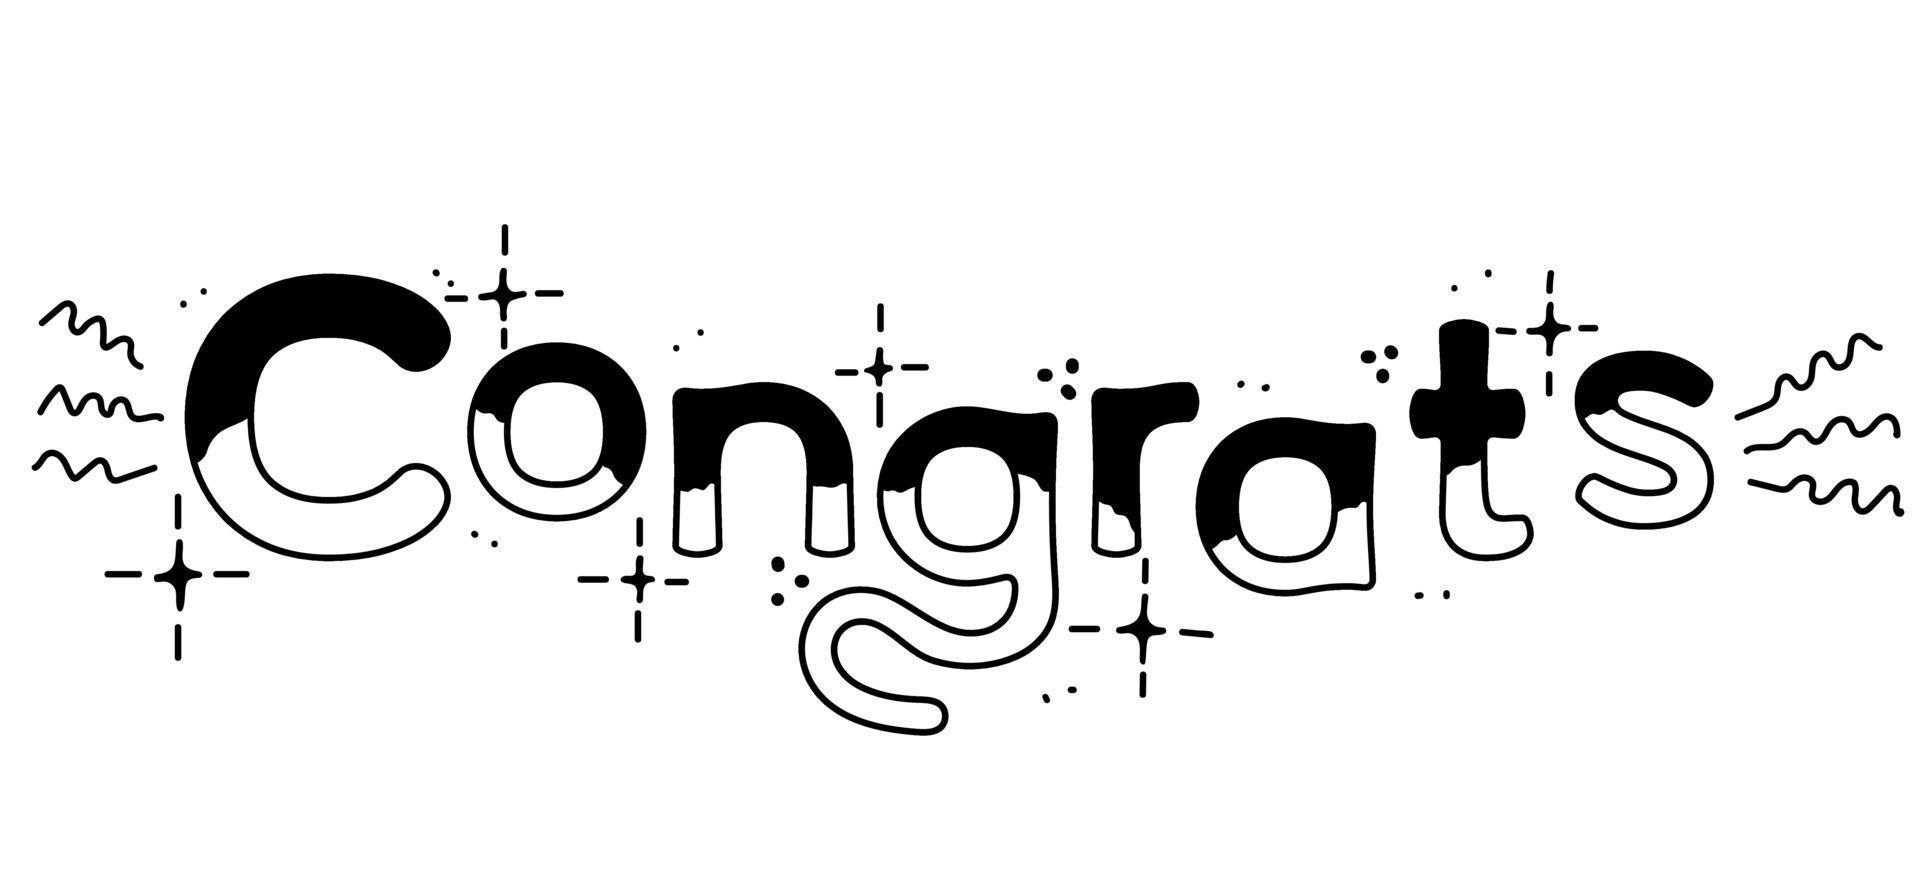 Text Congrats. Black-white Lettering with stars, lines, dots.  Vector illustration